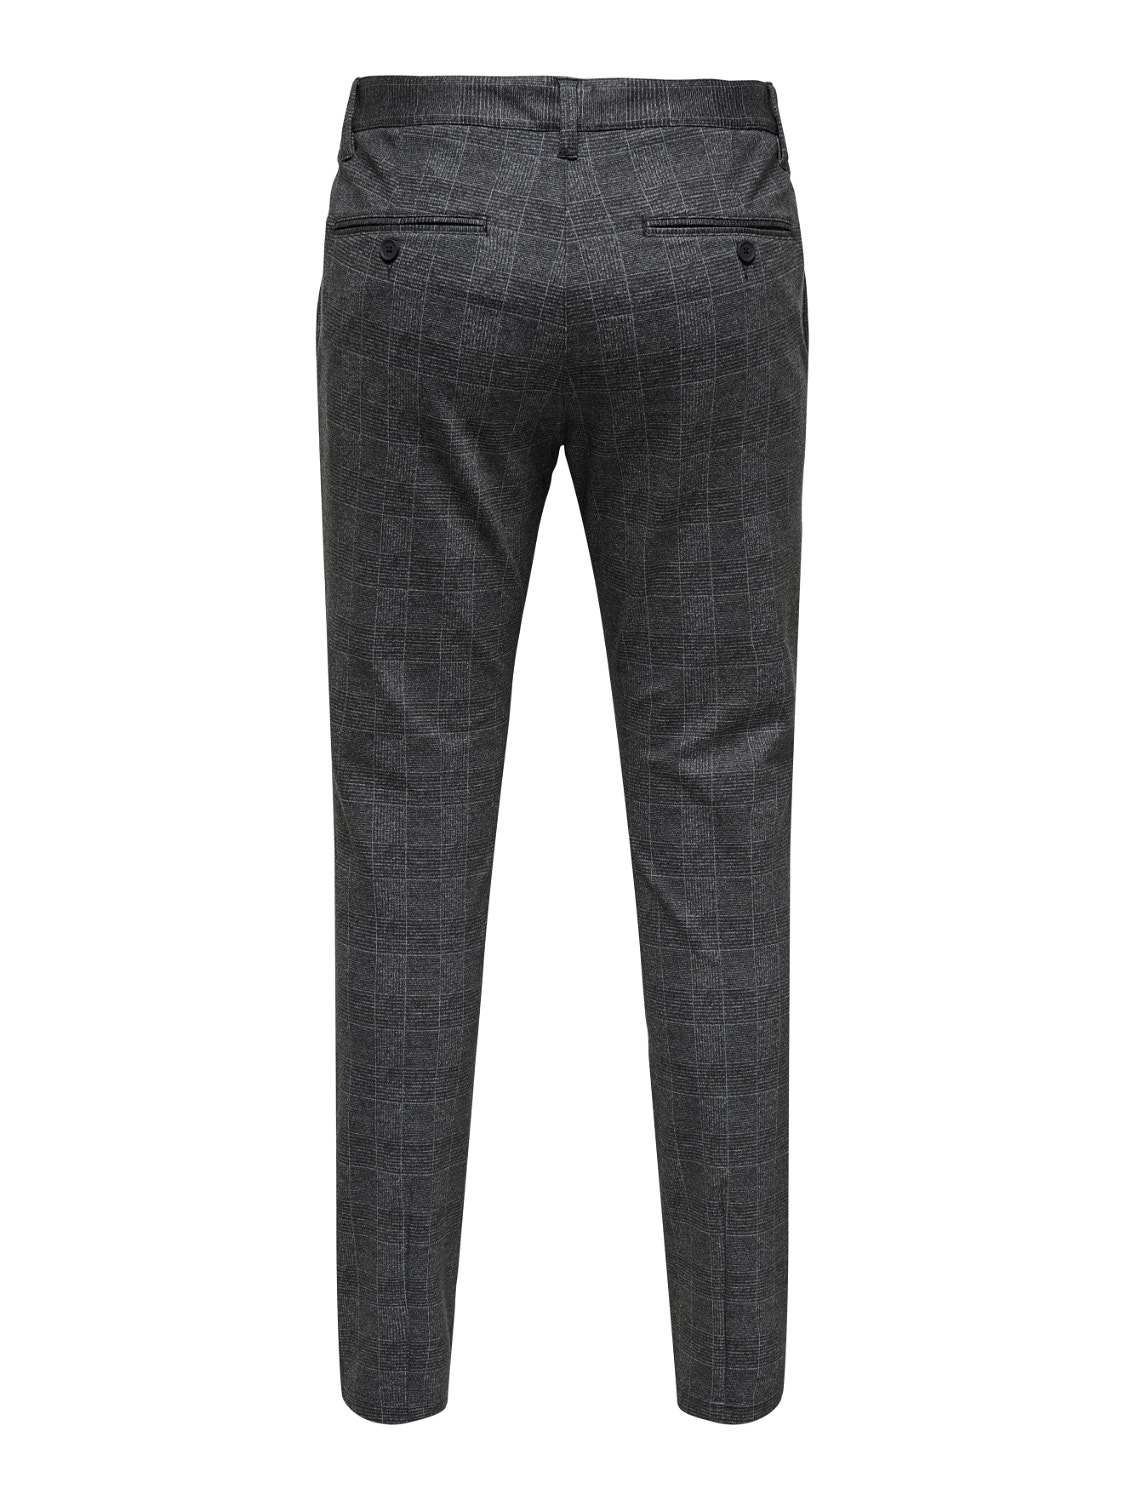 ONLY & SONS Slim Fit Mid waist Trousers -Black - 22019887